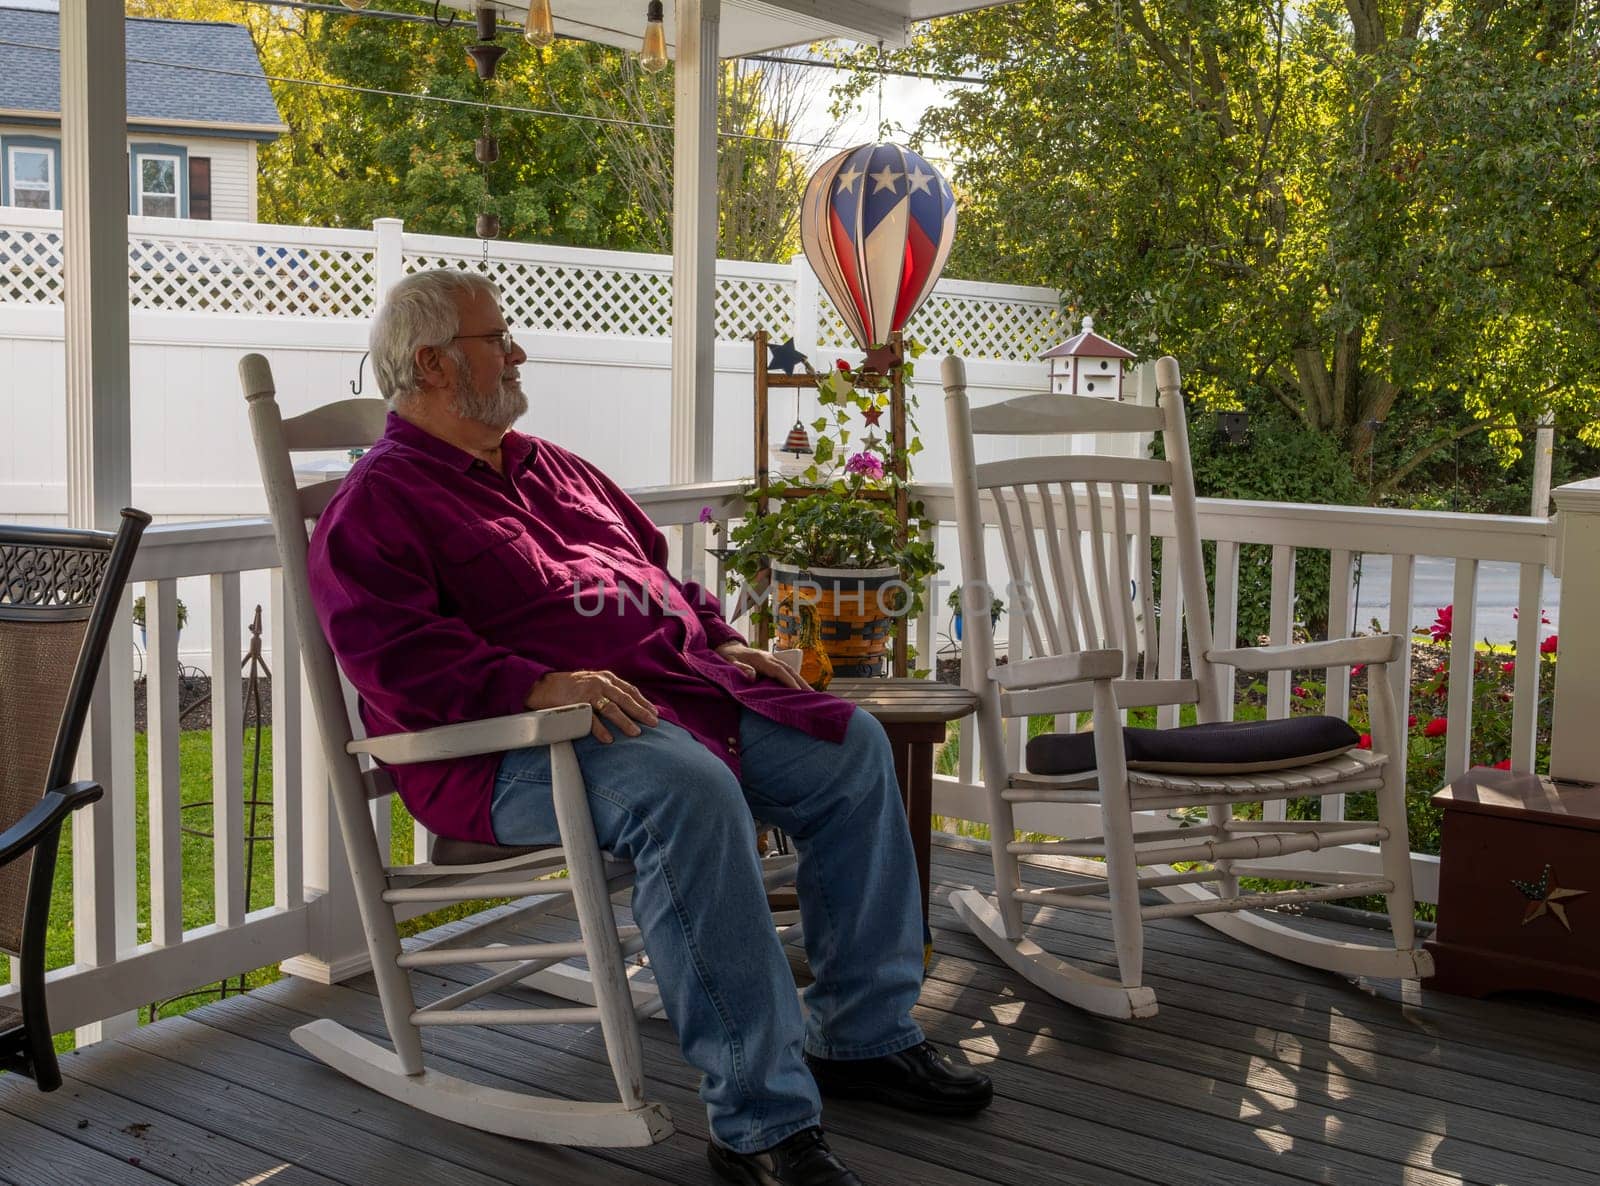 A Senior Aged Male Resting in a Rocking Chair, on a Deck, Enjoying His Retirement on a Autumn Day